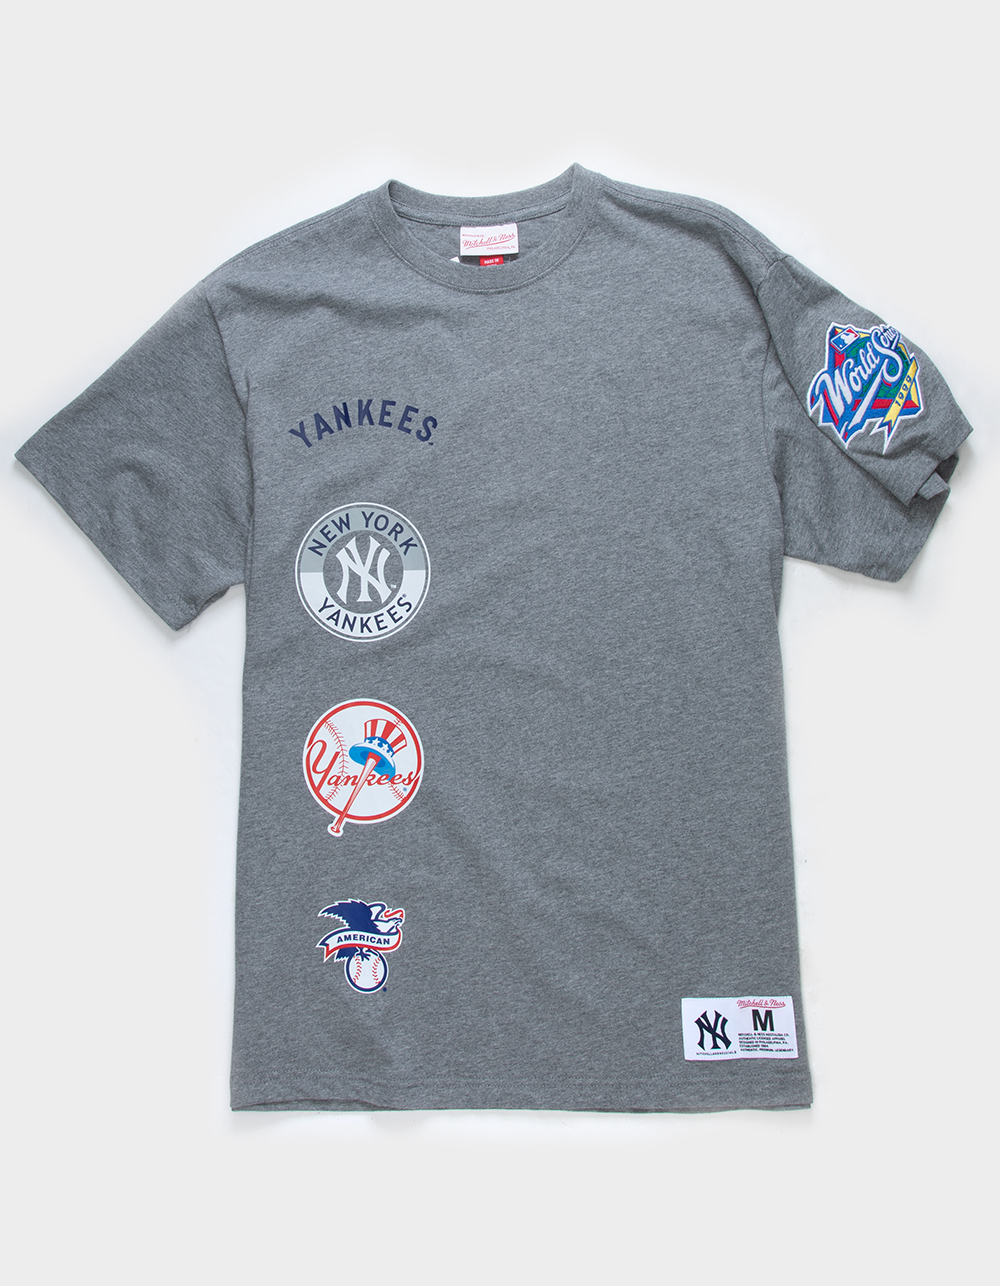 yankees mitchell and ness